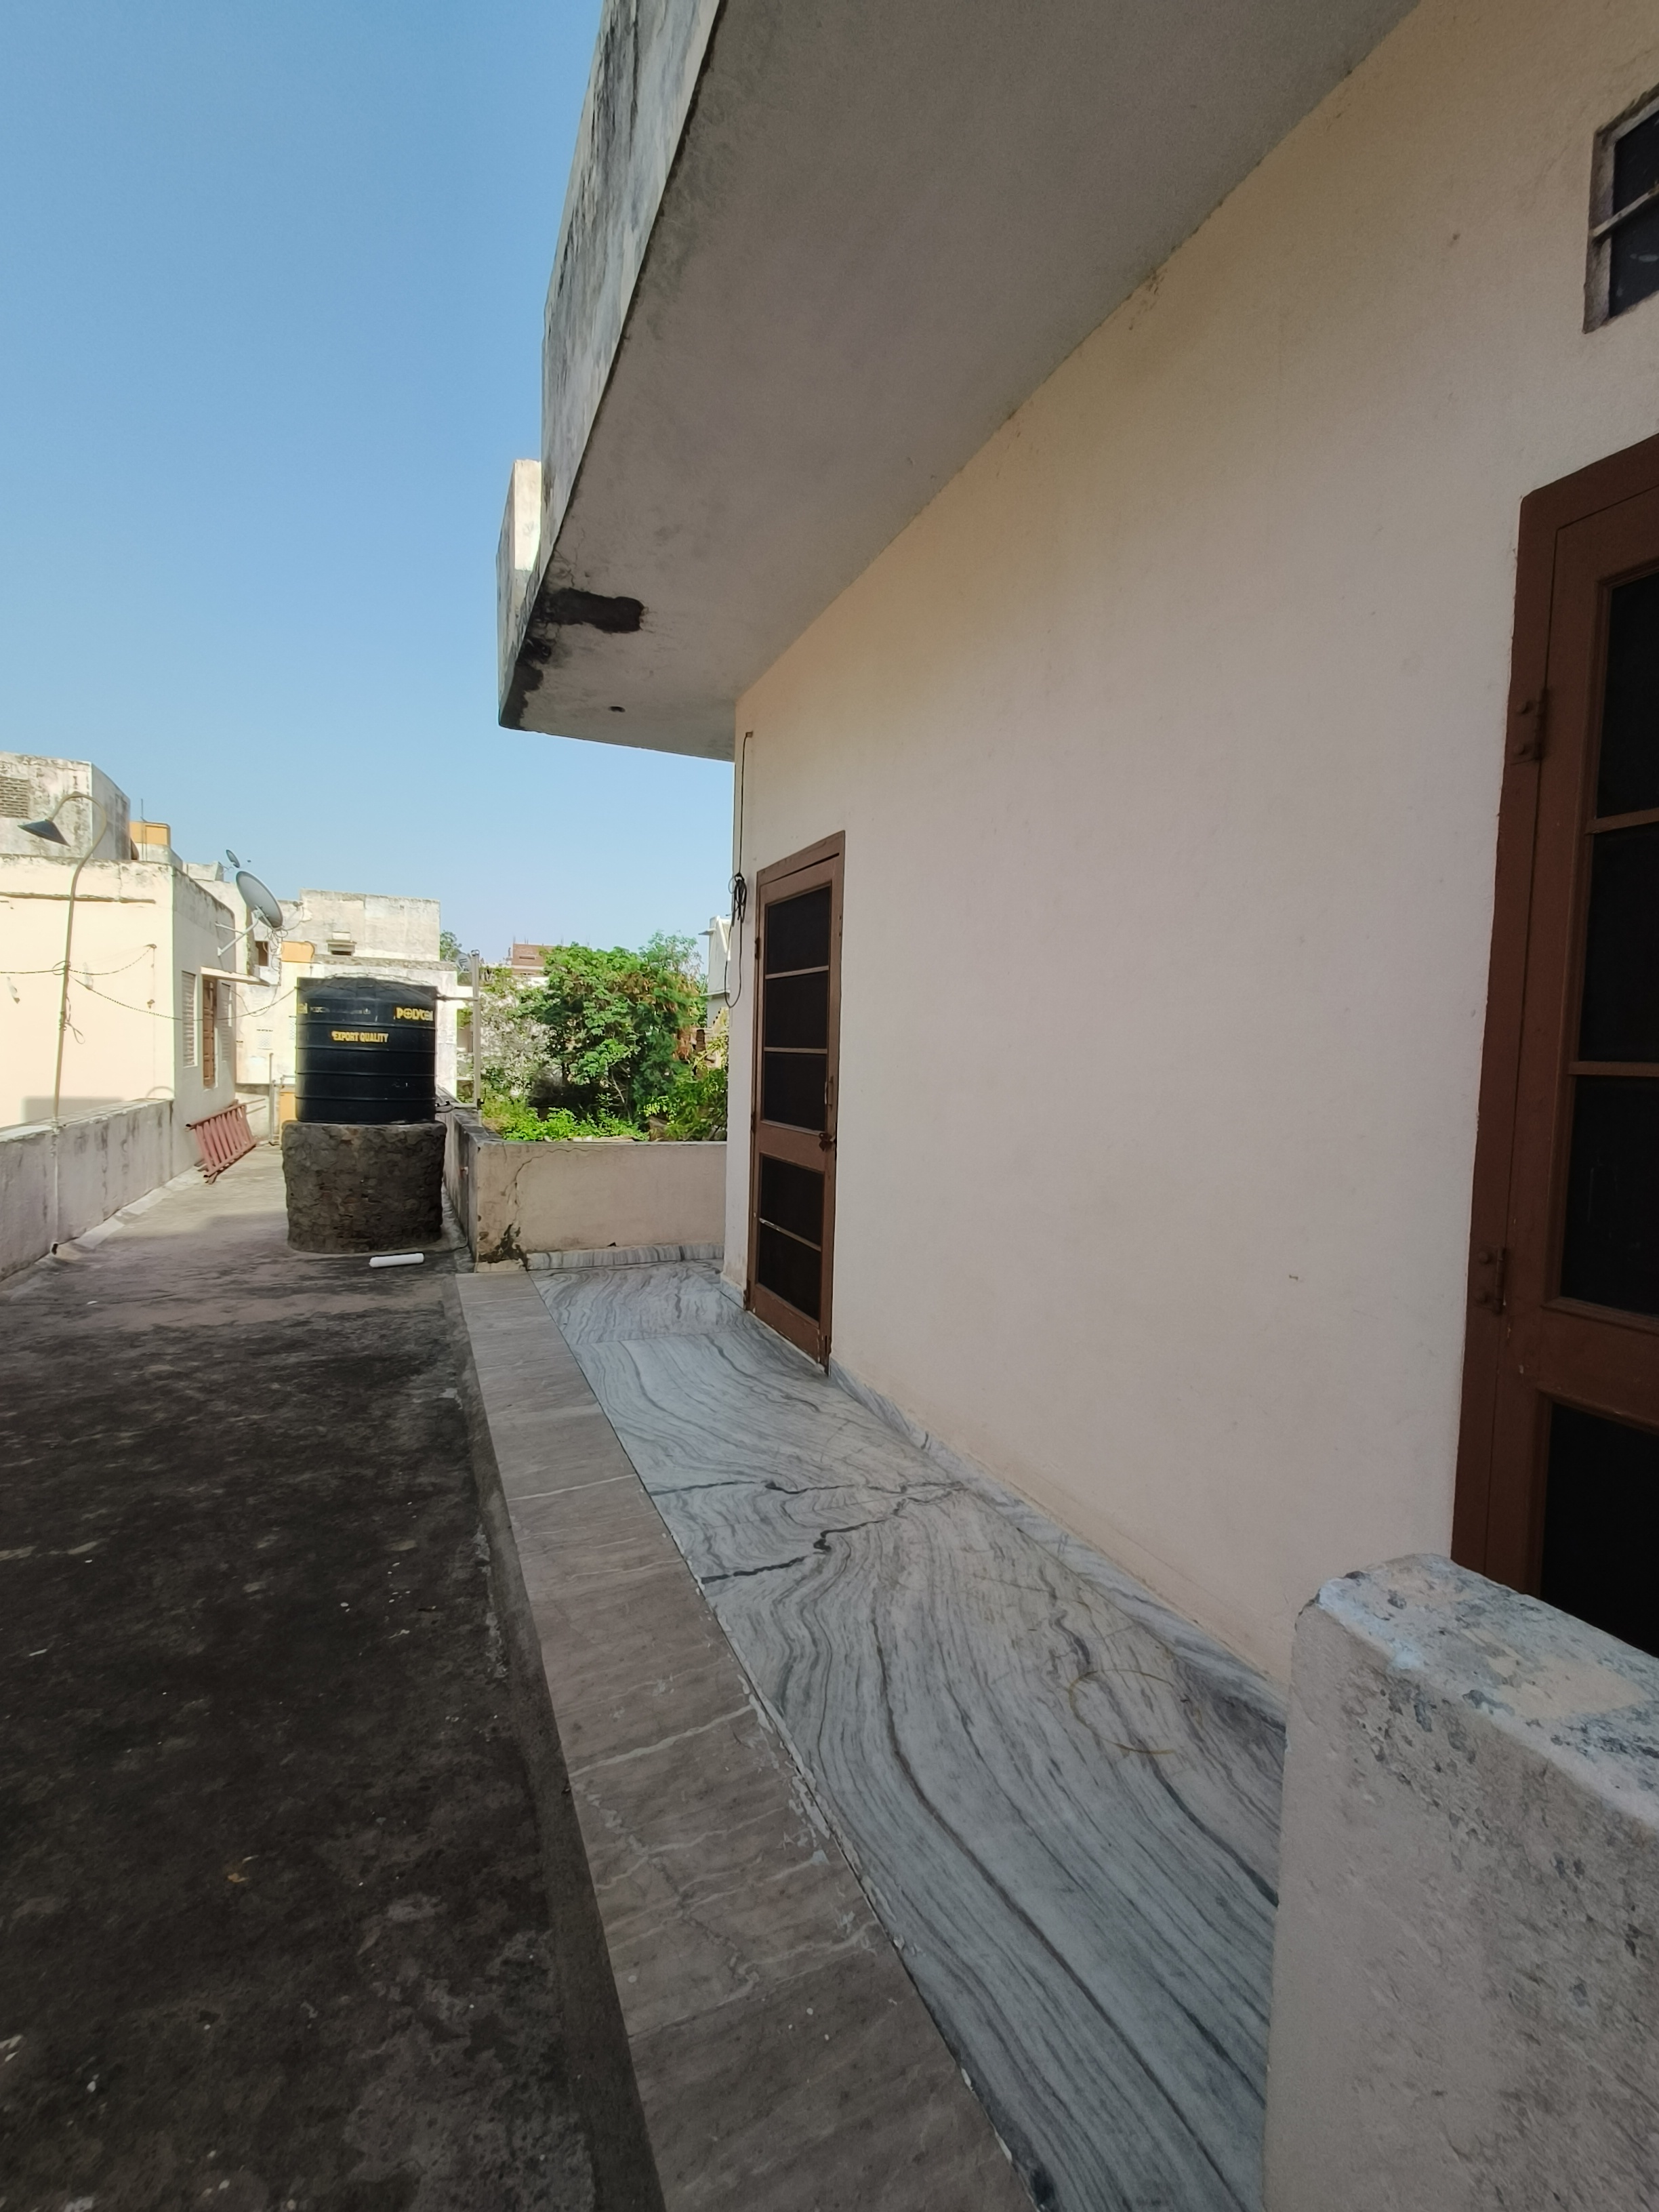 2 room set in poash locality near to heart of city-J L N Marg-Jaipur